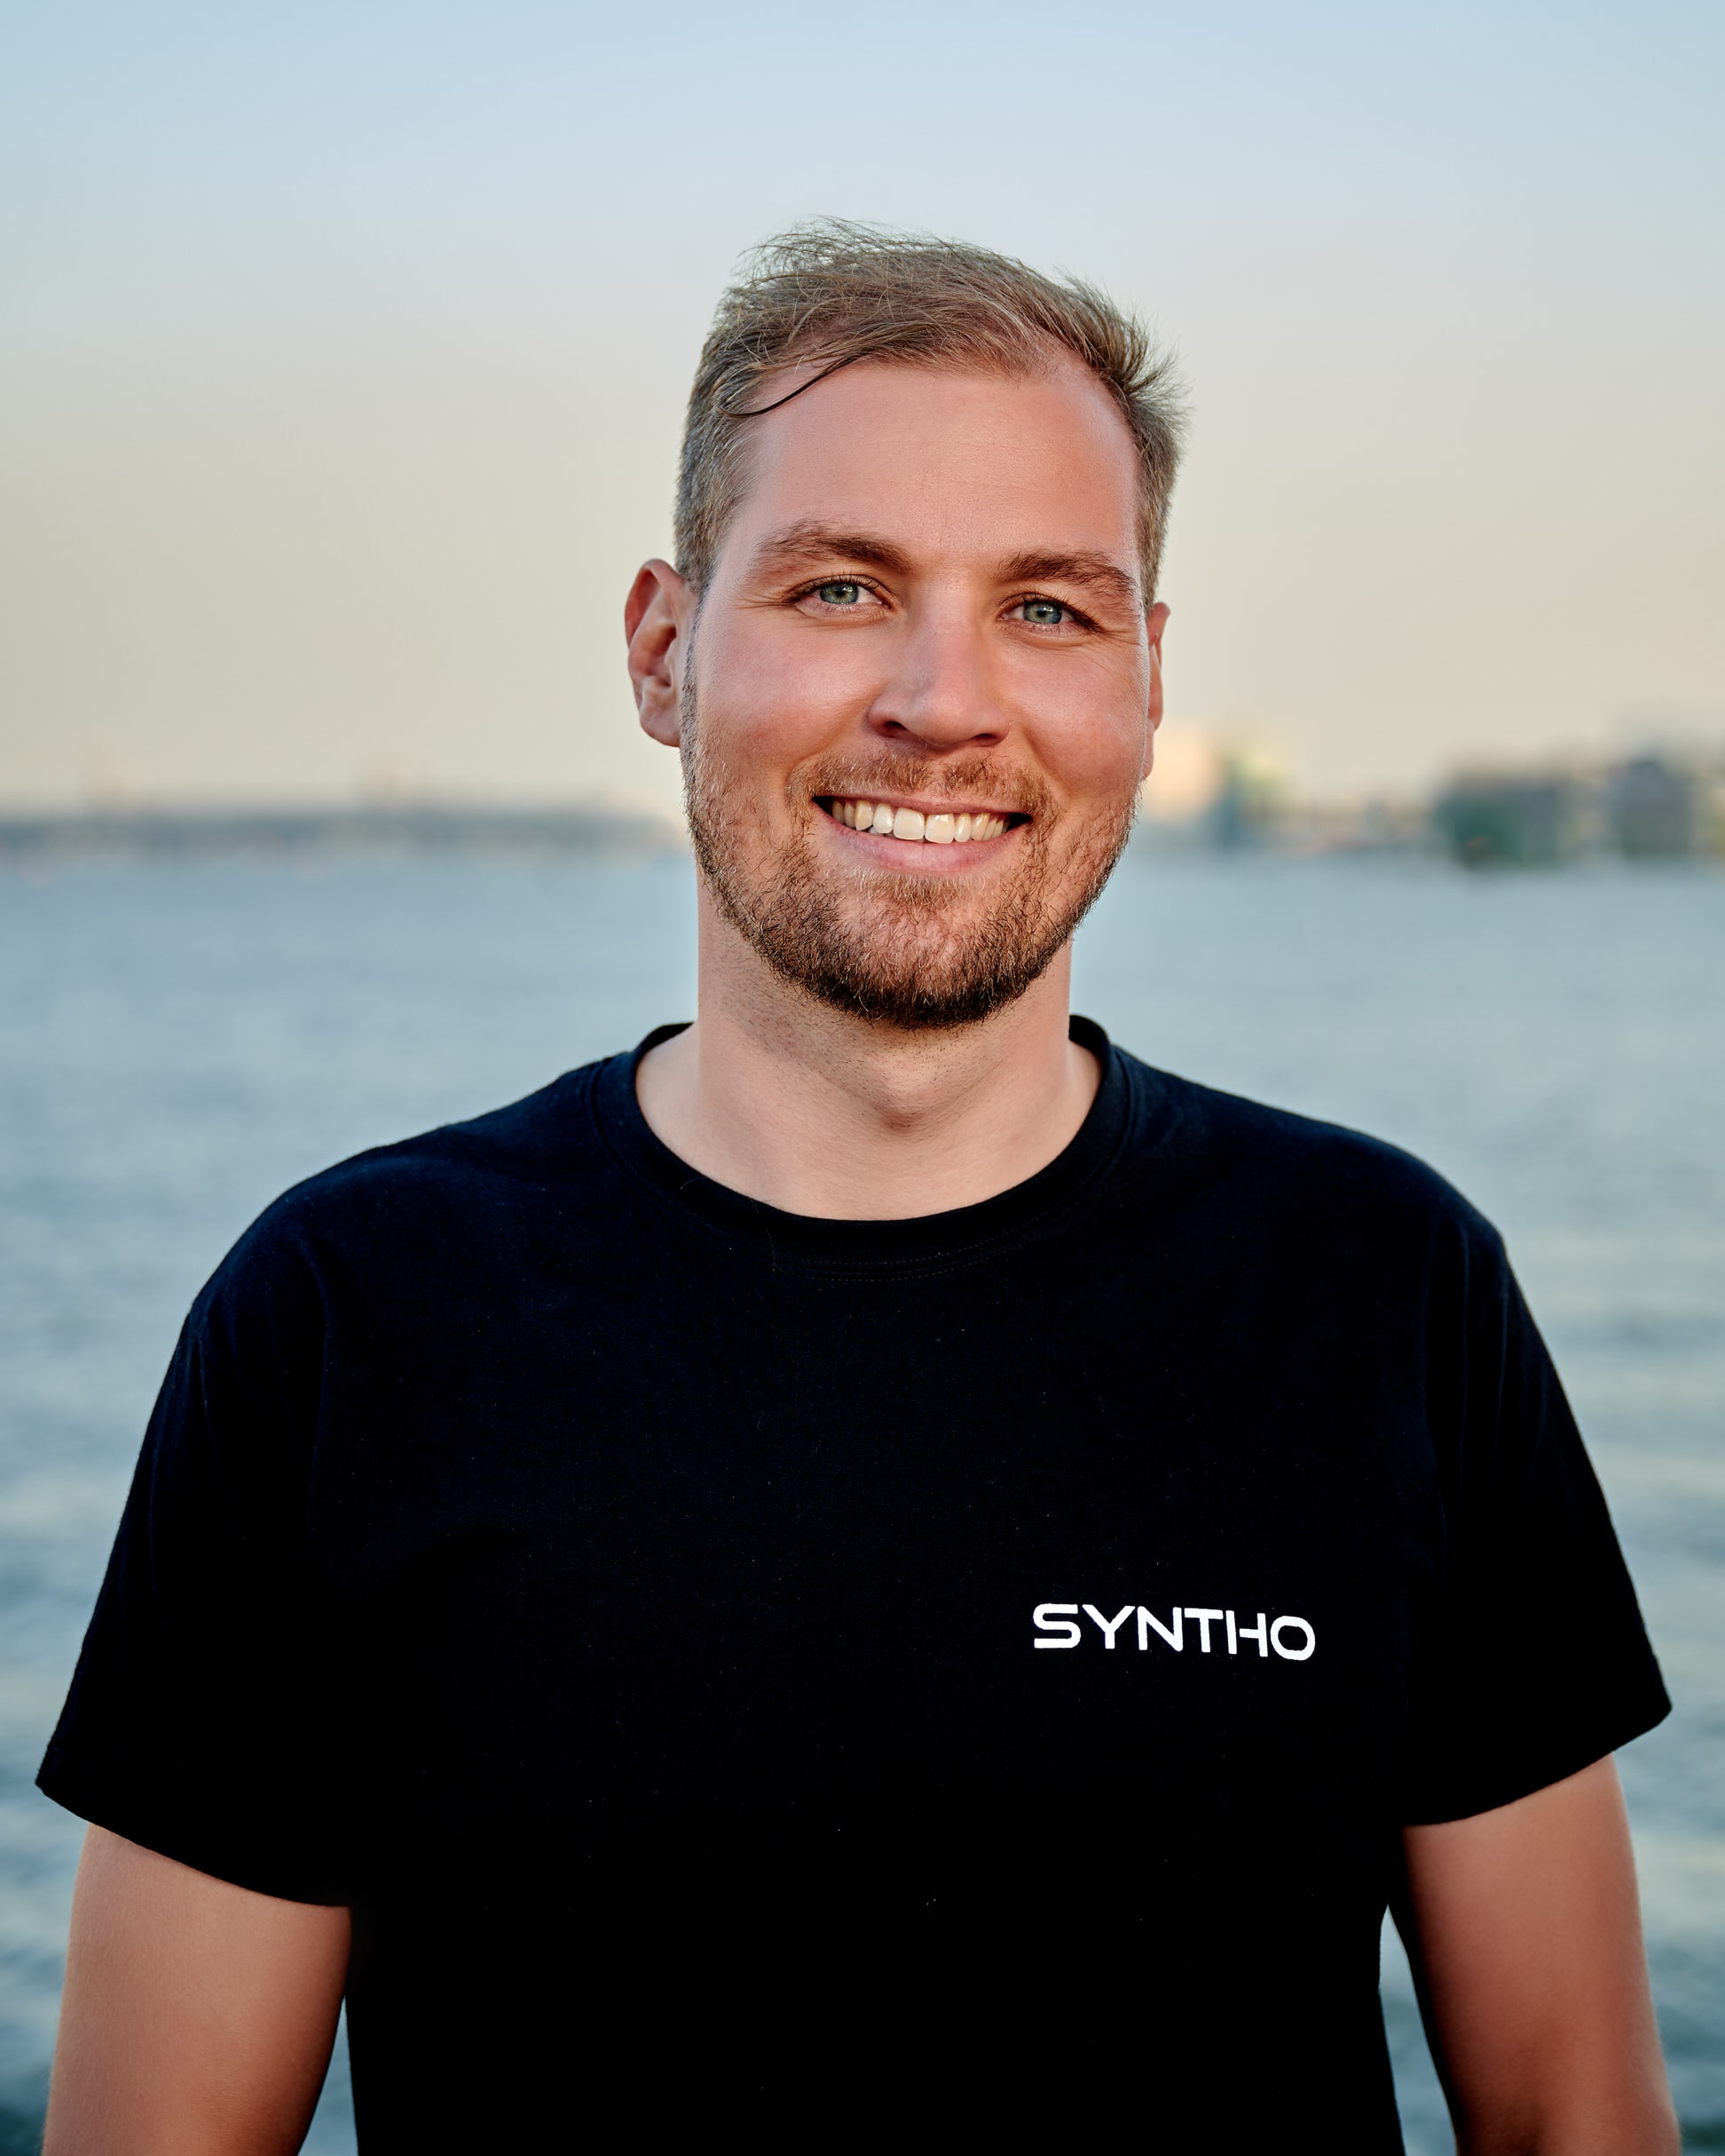 About syntho team